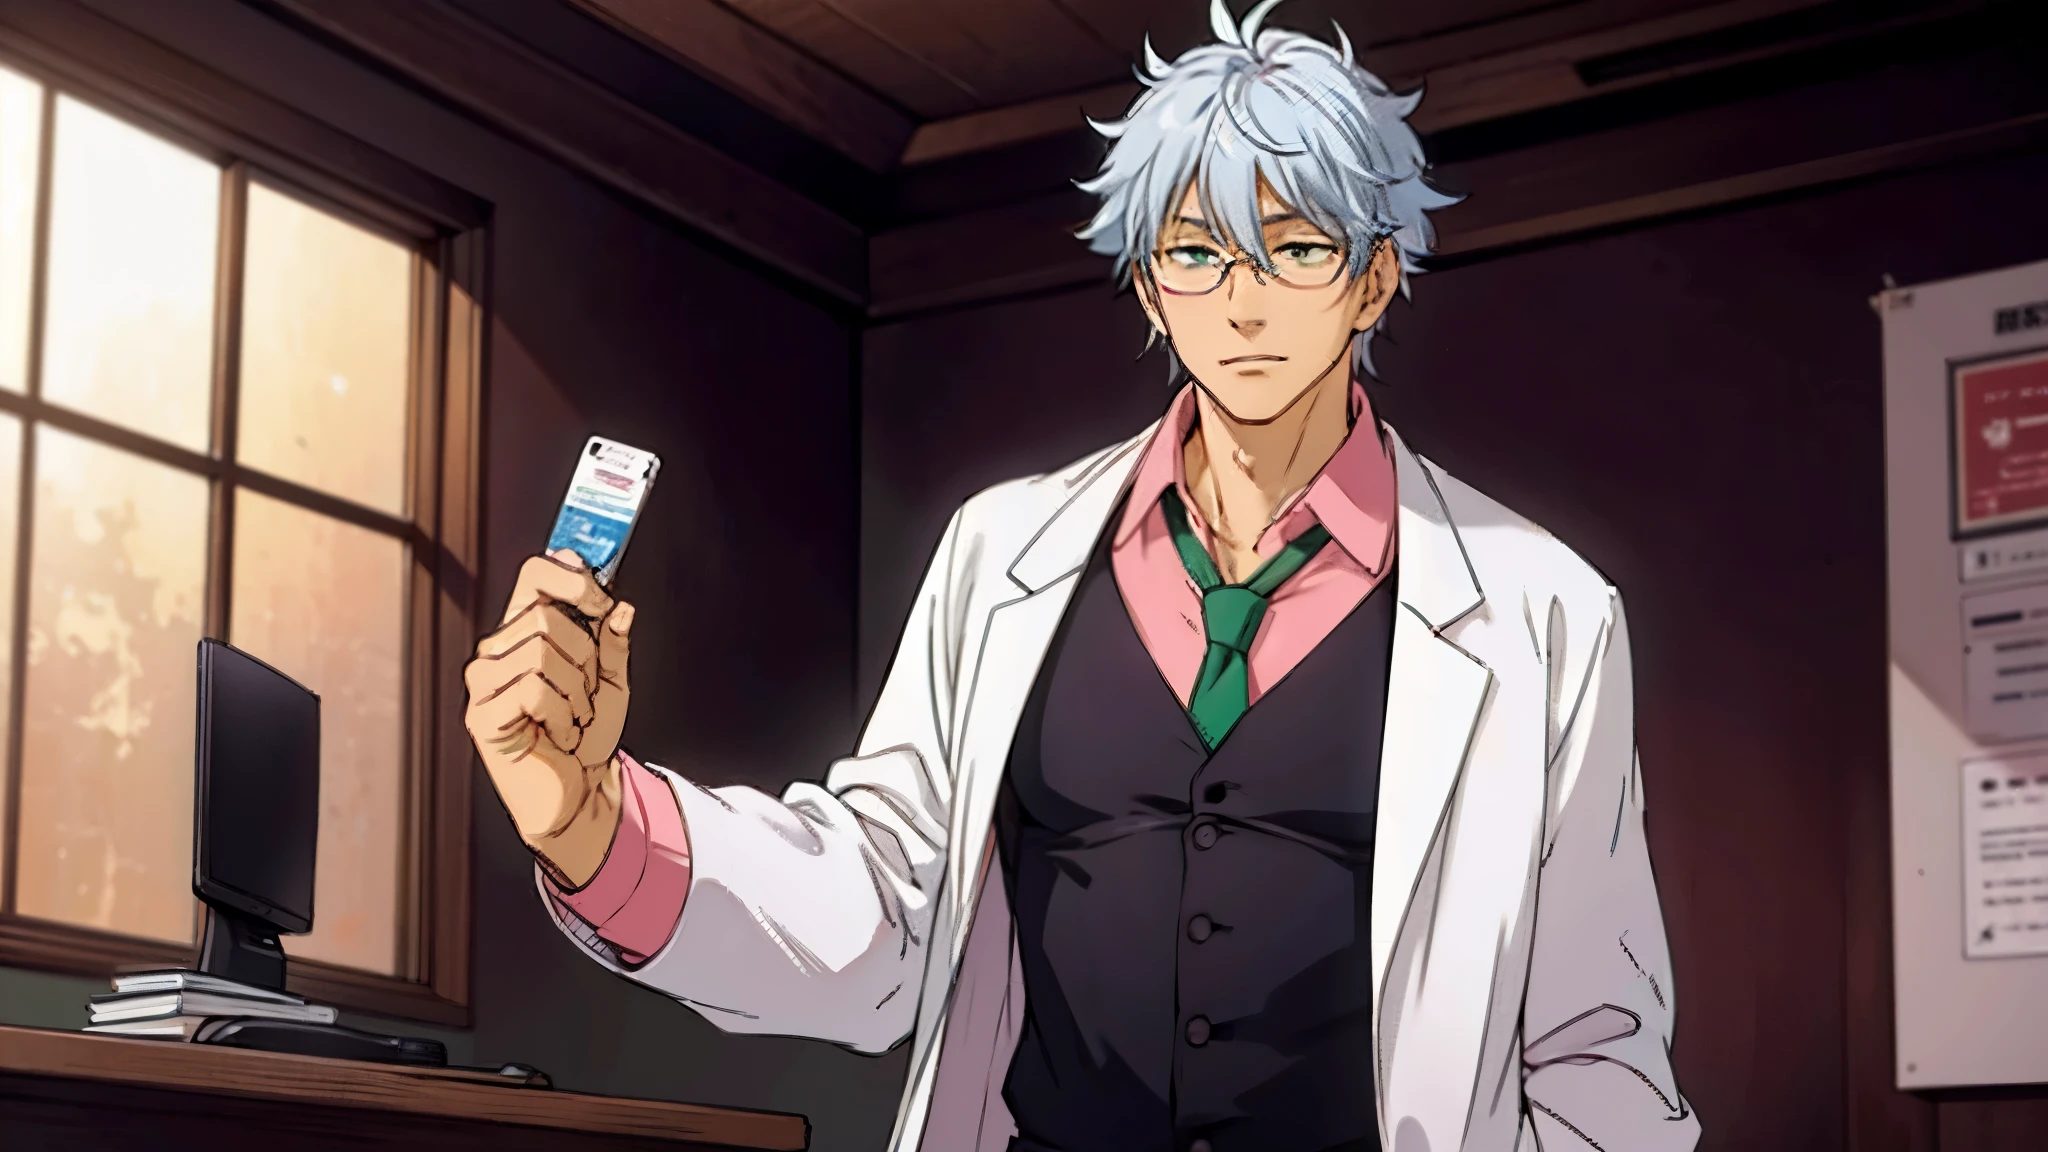 a teacher with a gray hair, he is wearing medical glasses, a lab coat, a green tie and a pink shirt